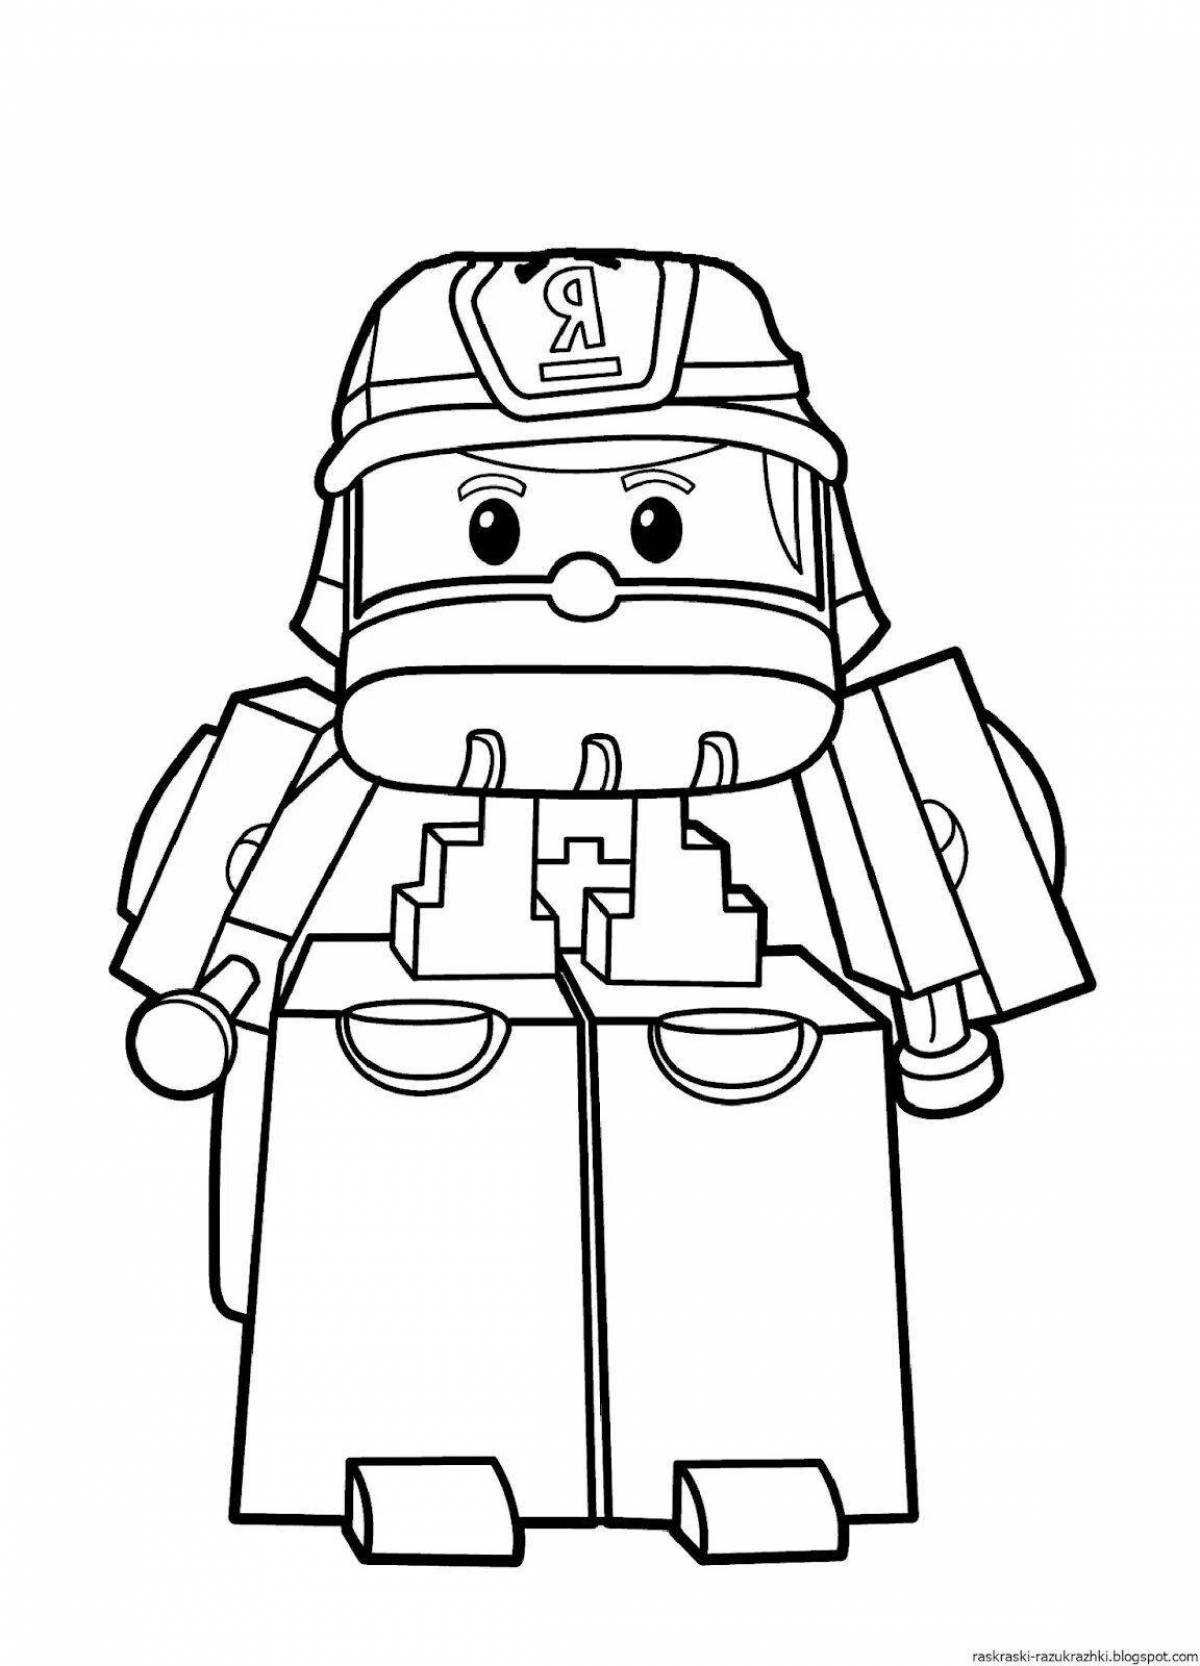 Mark robocar poly colorful coloring page